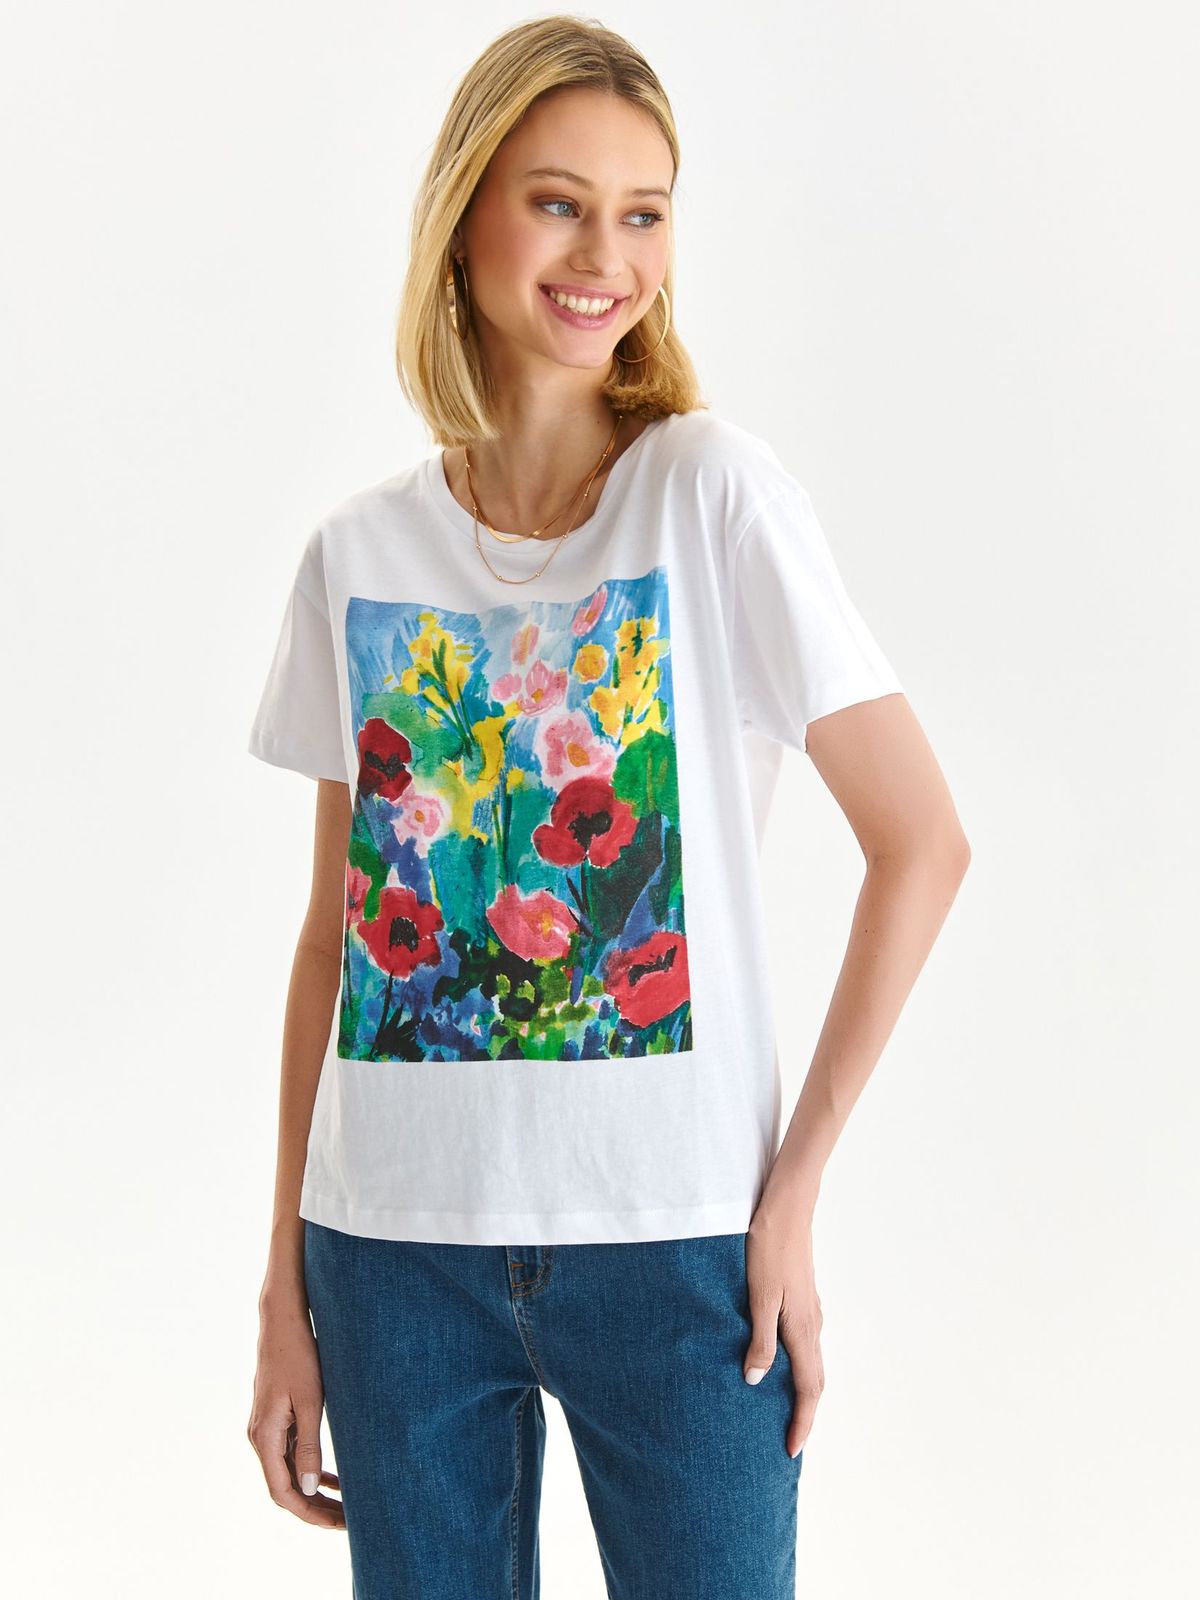 White t-shirt slightly elastic cotton loose fit with floral print